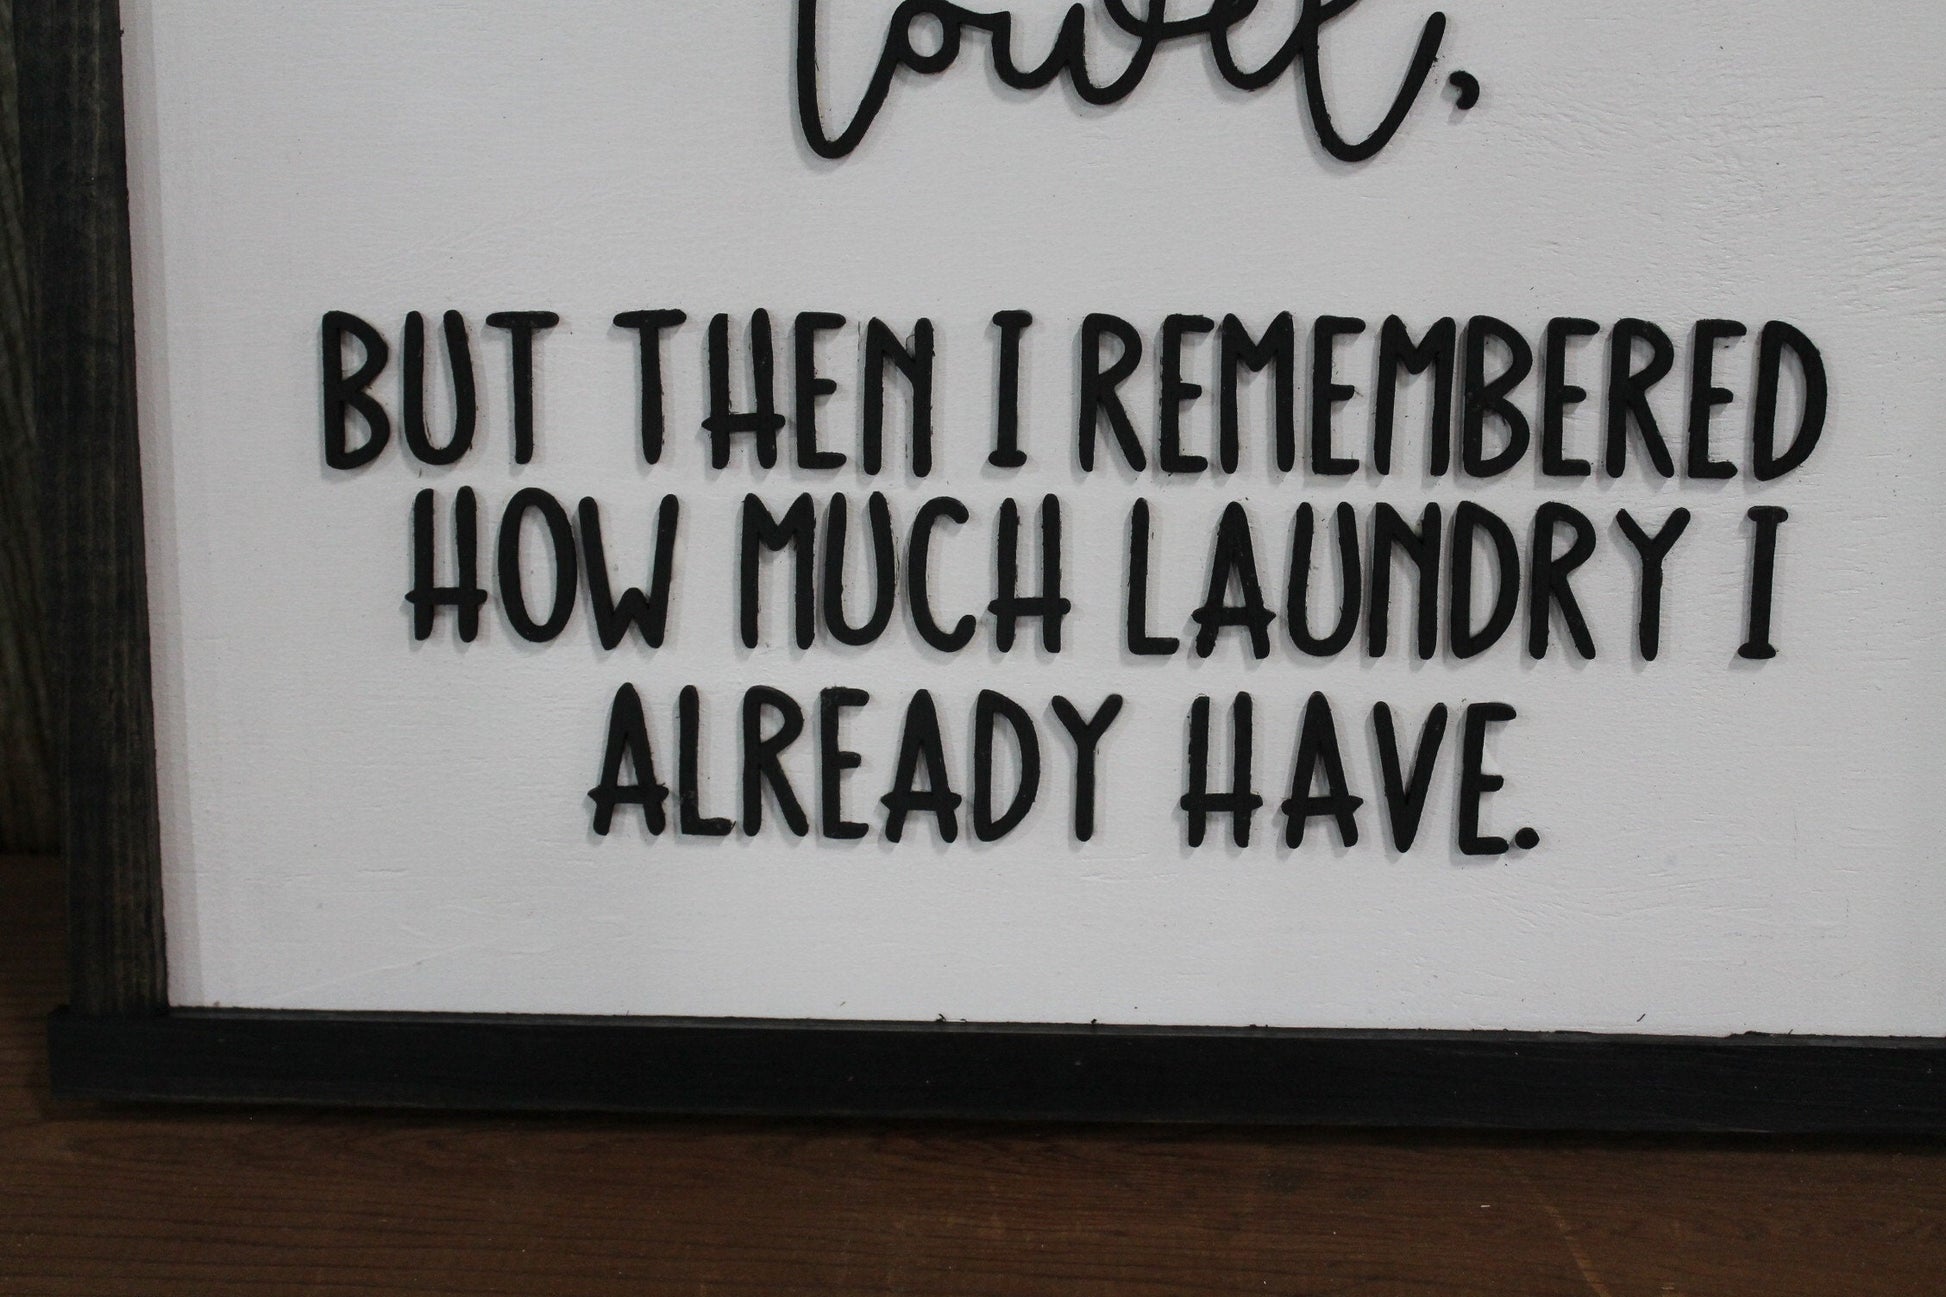 Laundry Room Funny Sign Throw in the Towel Humor Funny Too Much Laundry Cleaning House Work Wood Primitive Wall Decor Raised Text